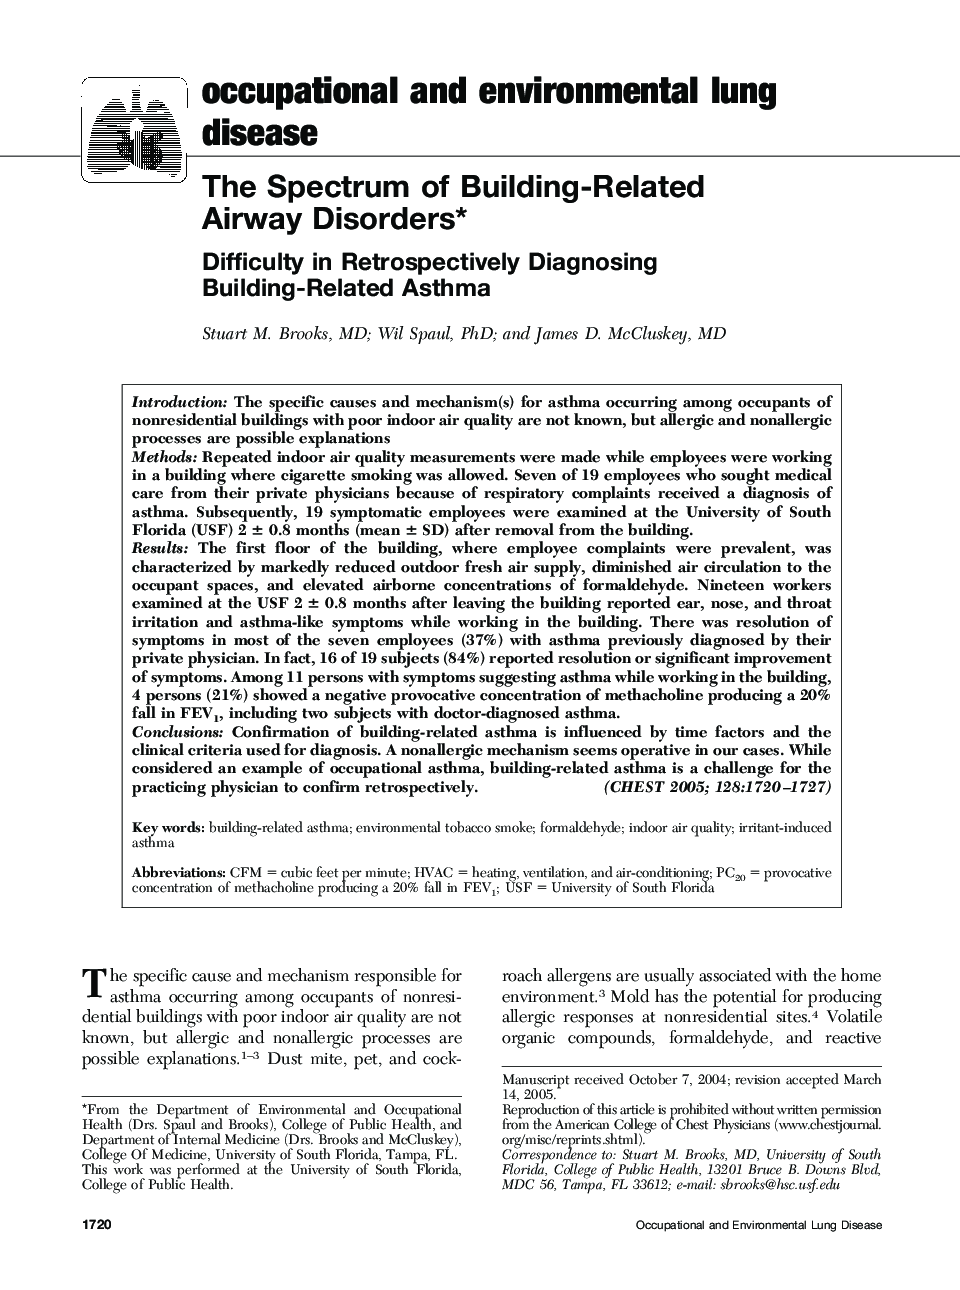 The Spectrum of Building-Related Airway Disorders